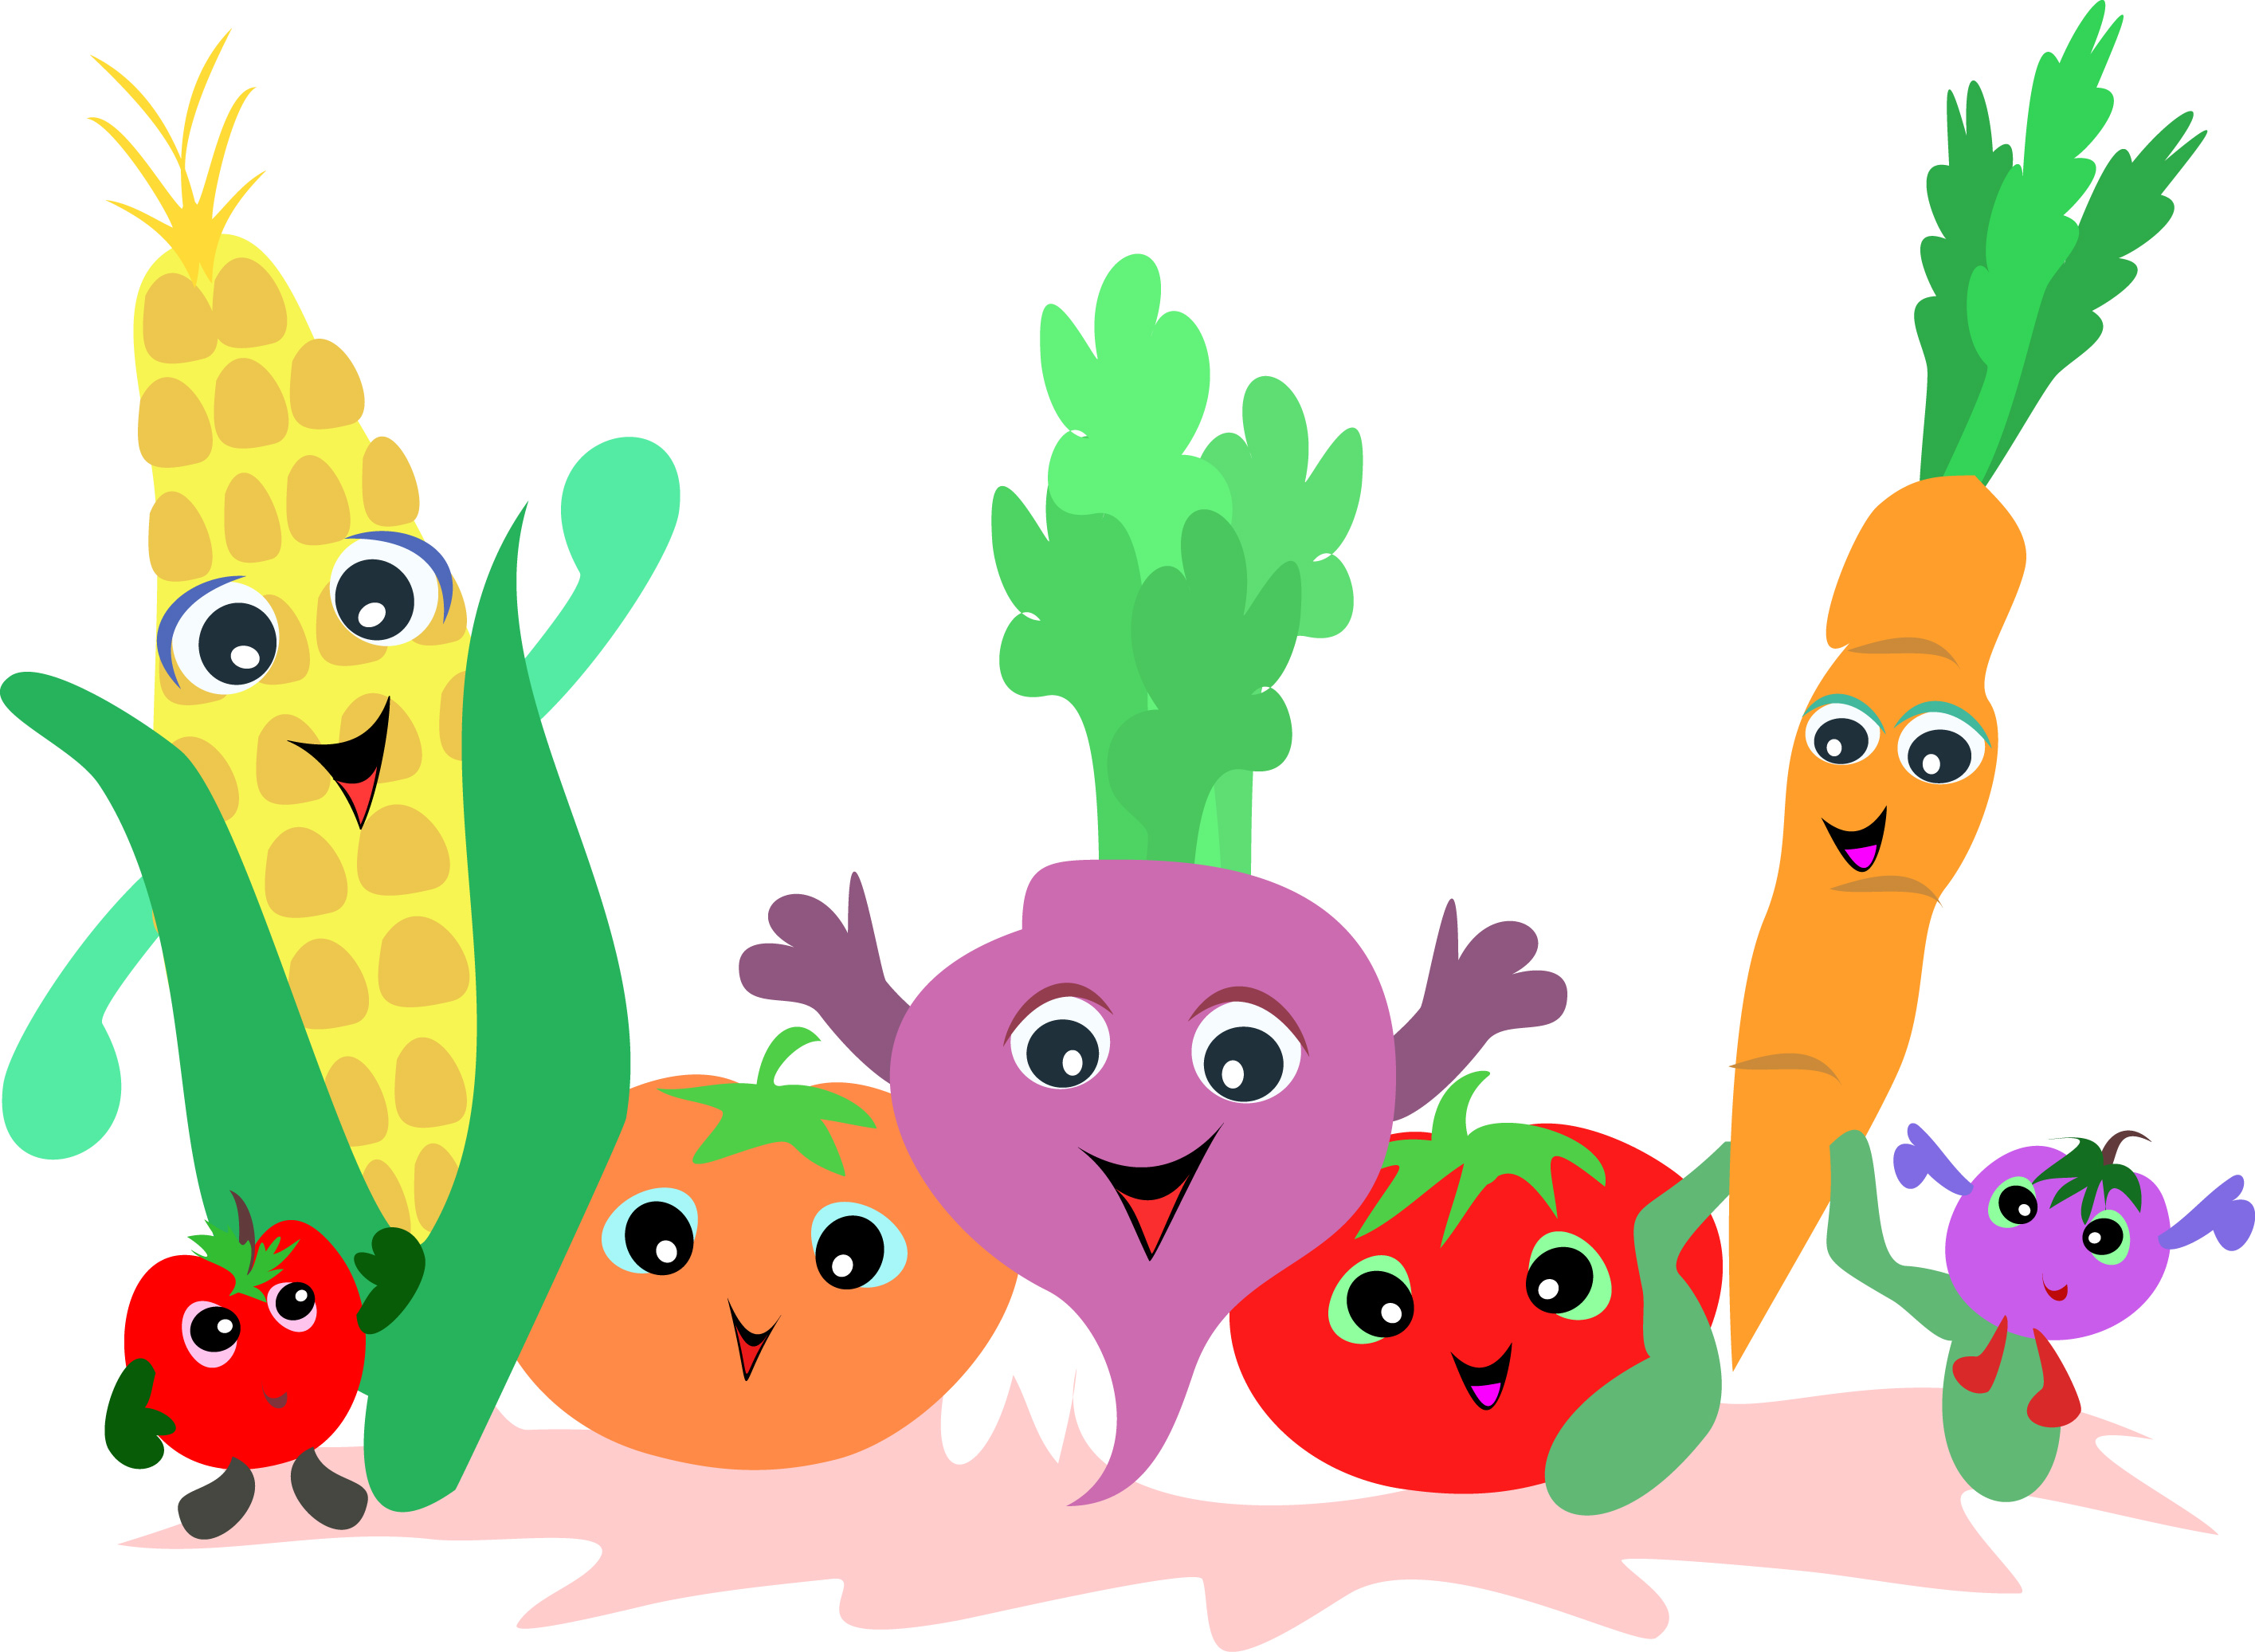 Fruit And Vegetable Clipart Black And White | Clipart Panda - Free ...